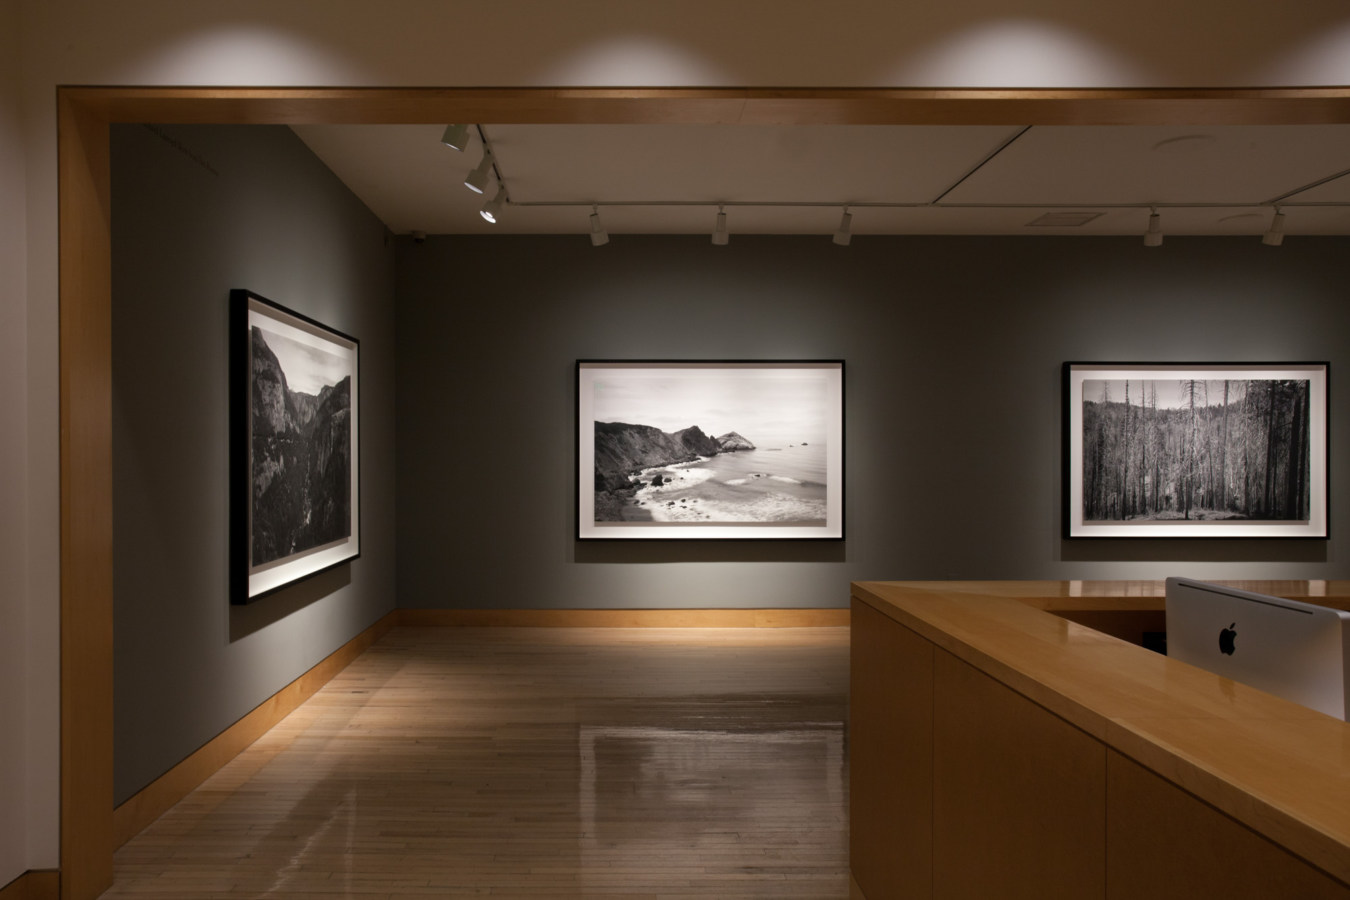 Color image of gallery entryway exhibiting large scale black and white photographs on grey gallery walls